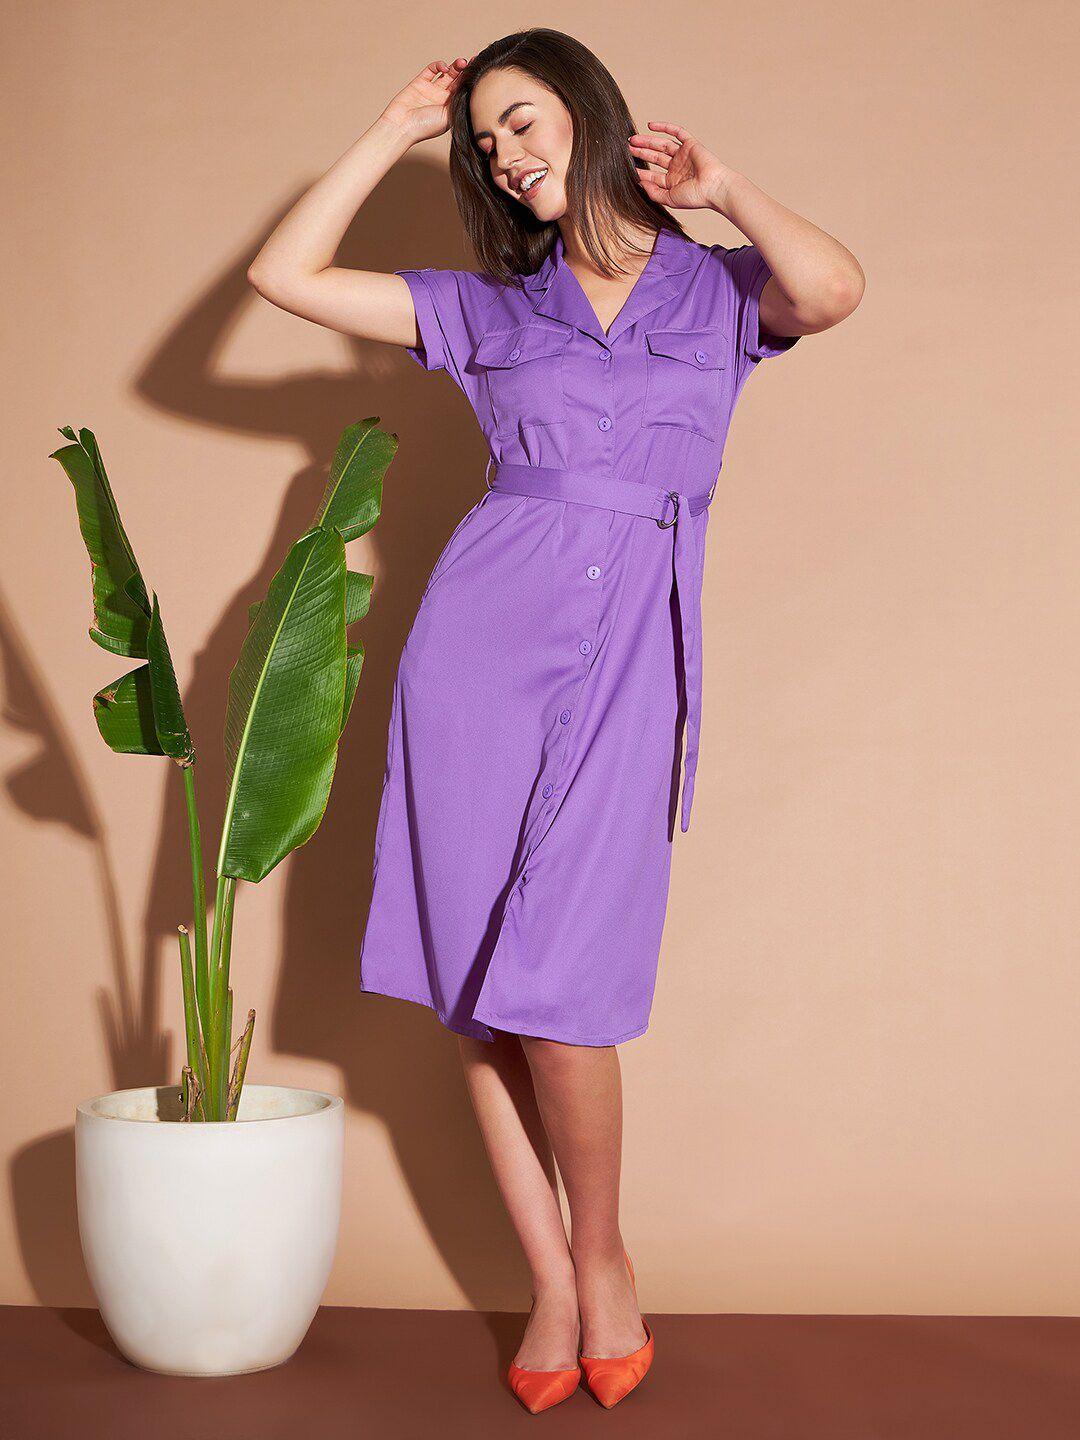 marie-claire-purple-roll-up-sleeves-shirt-midi-dress